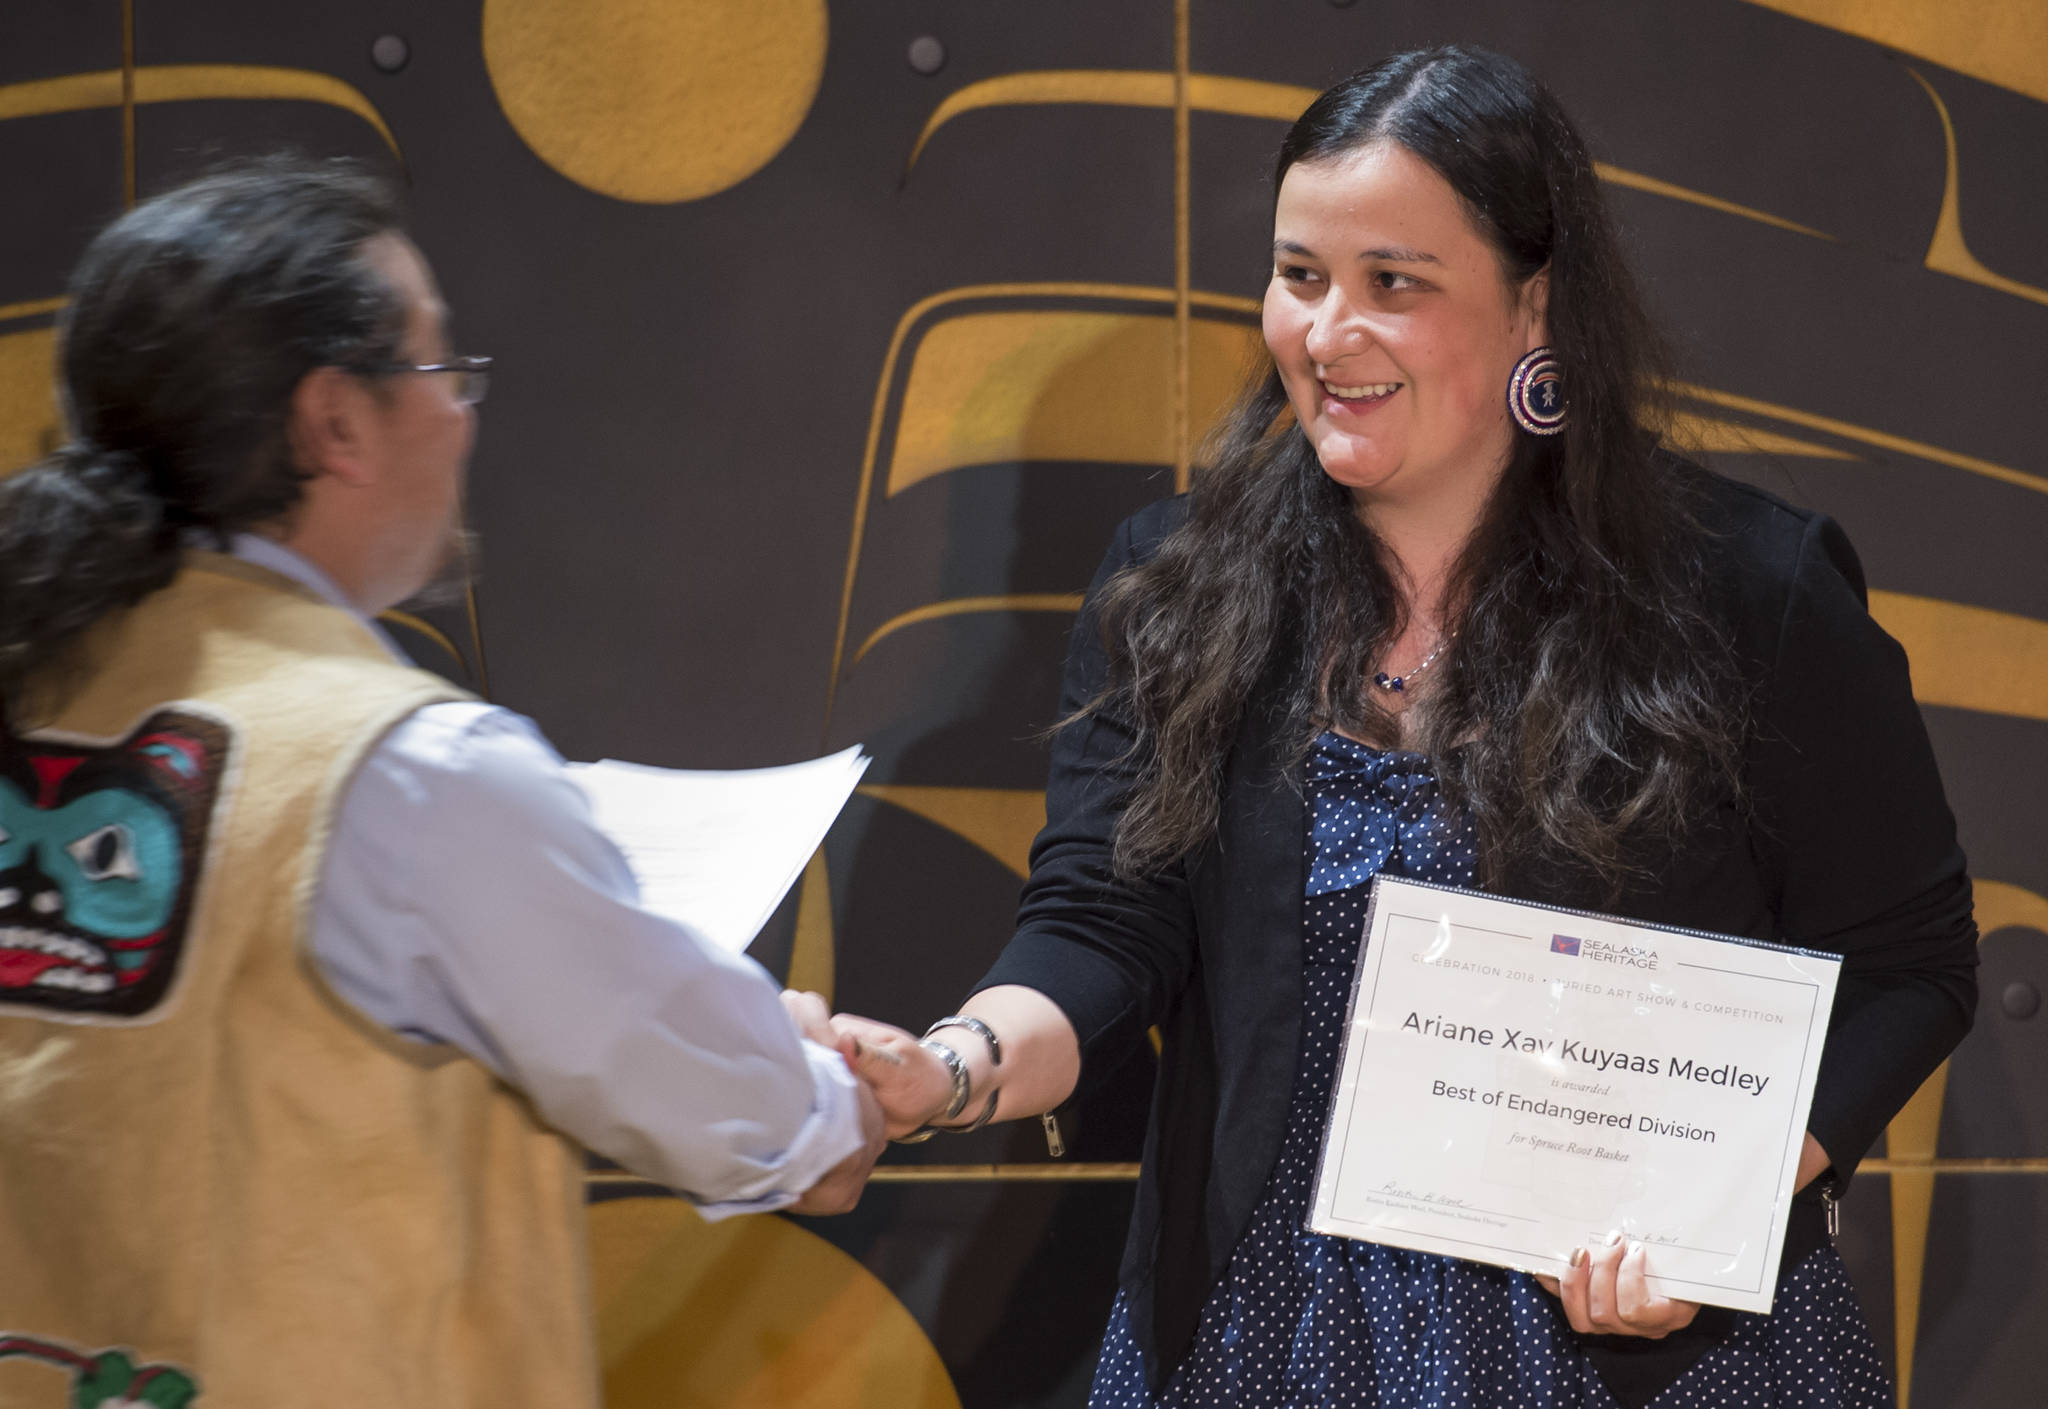 Ariane Xay Kuyaas Medley is presented her Best of Endangered Division award from Joe Nelson at Sealaska Heritage Institute’s Juried Art Competition award ceremony at the Walter Soboleff Center on Wednesday, June 6, 2018. Medley went on to win the Best of Show. (Michael Penn | Juneau Empire)